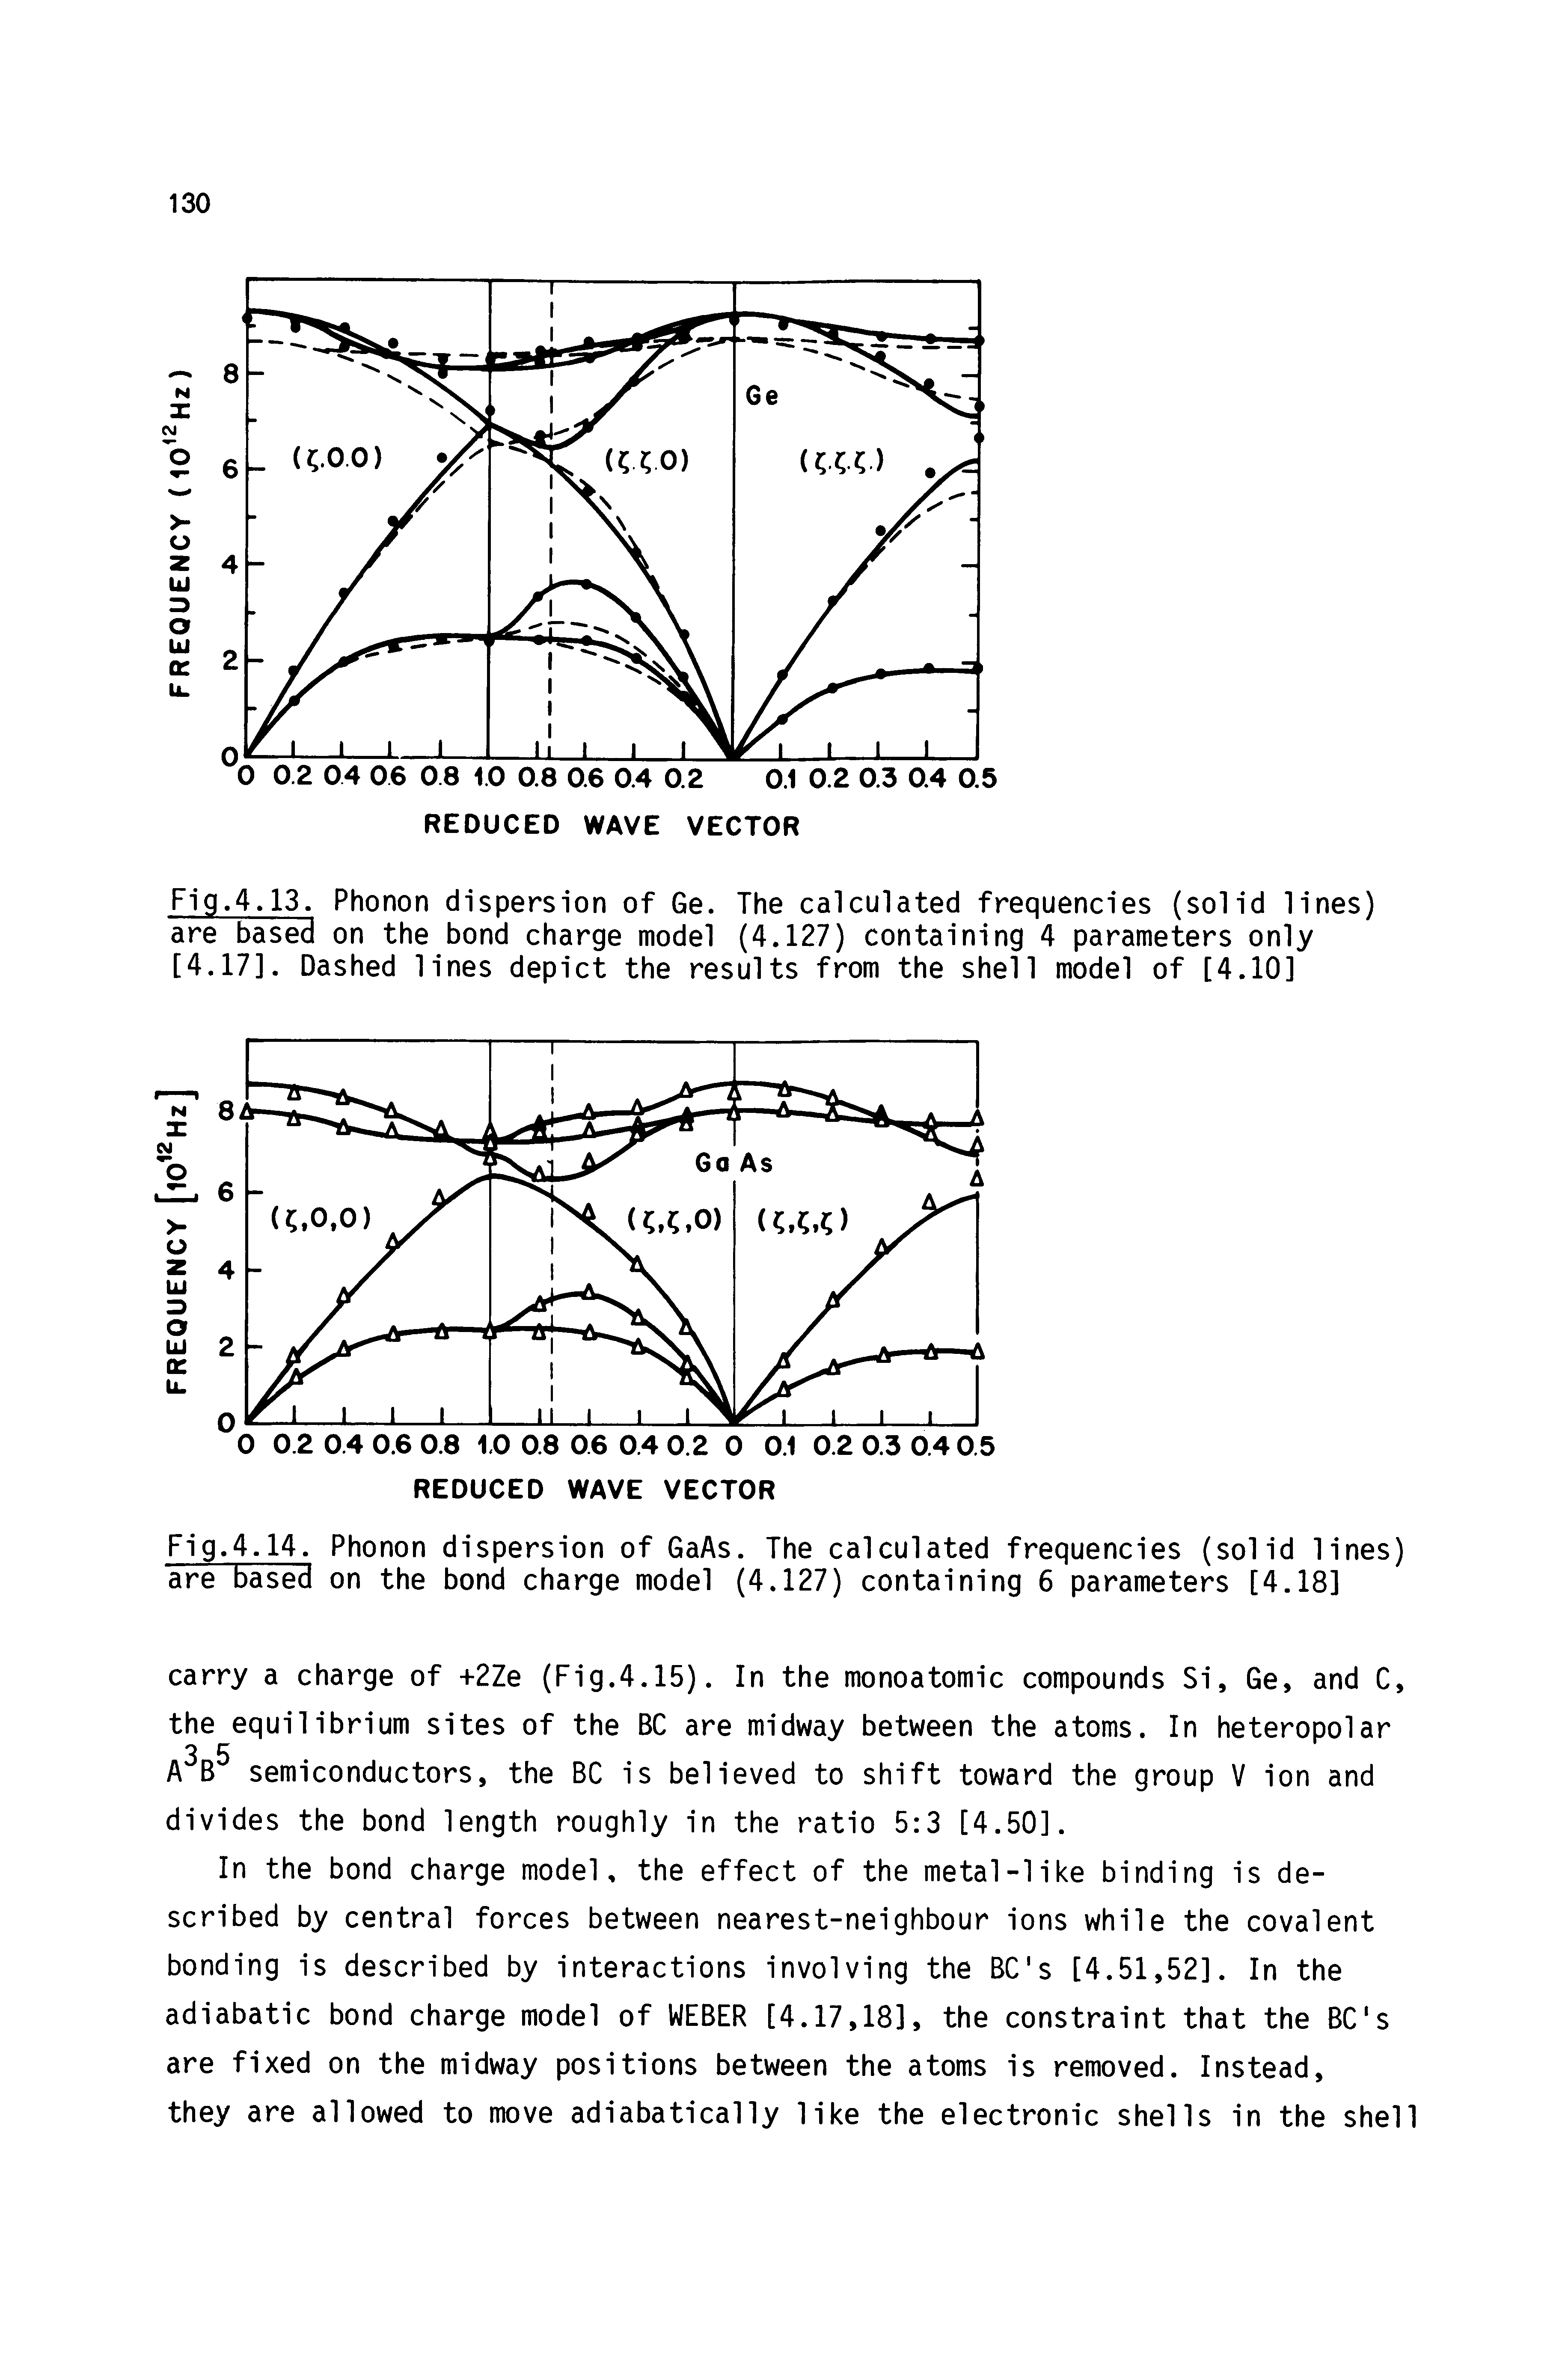 Fig.4 13. Phonon dispersion of Ge. The calculated frequencies (solid lines) are based on the bond charge model (4.127) containing 4 parameters only [4.17]. Dashed lines depict the results from the shell model of [4.10]...